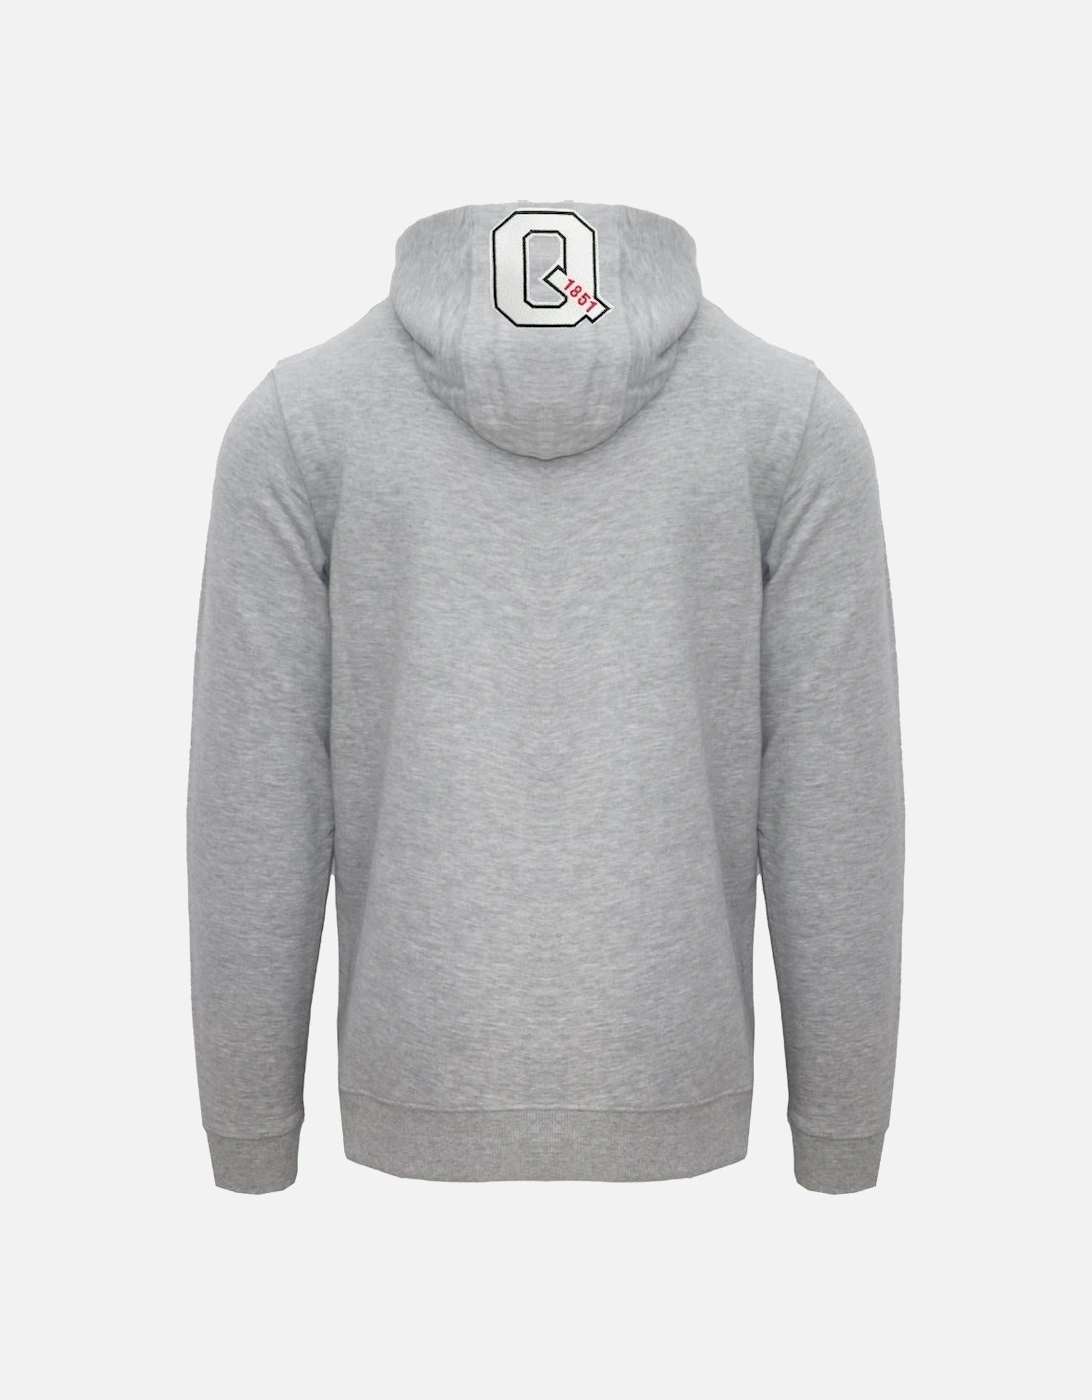 Classic Large A Logo Grey Zip-Up Hoodie